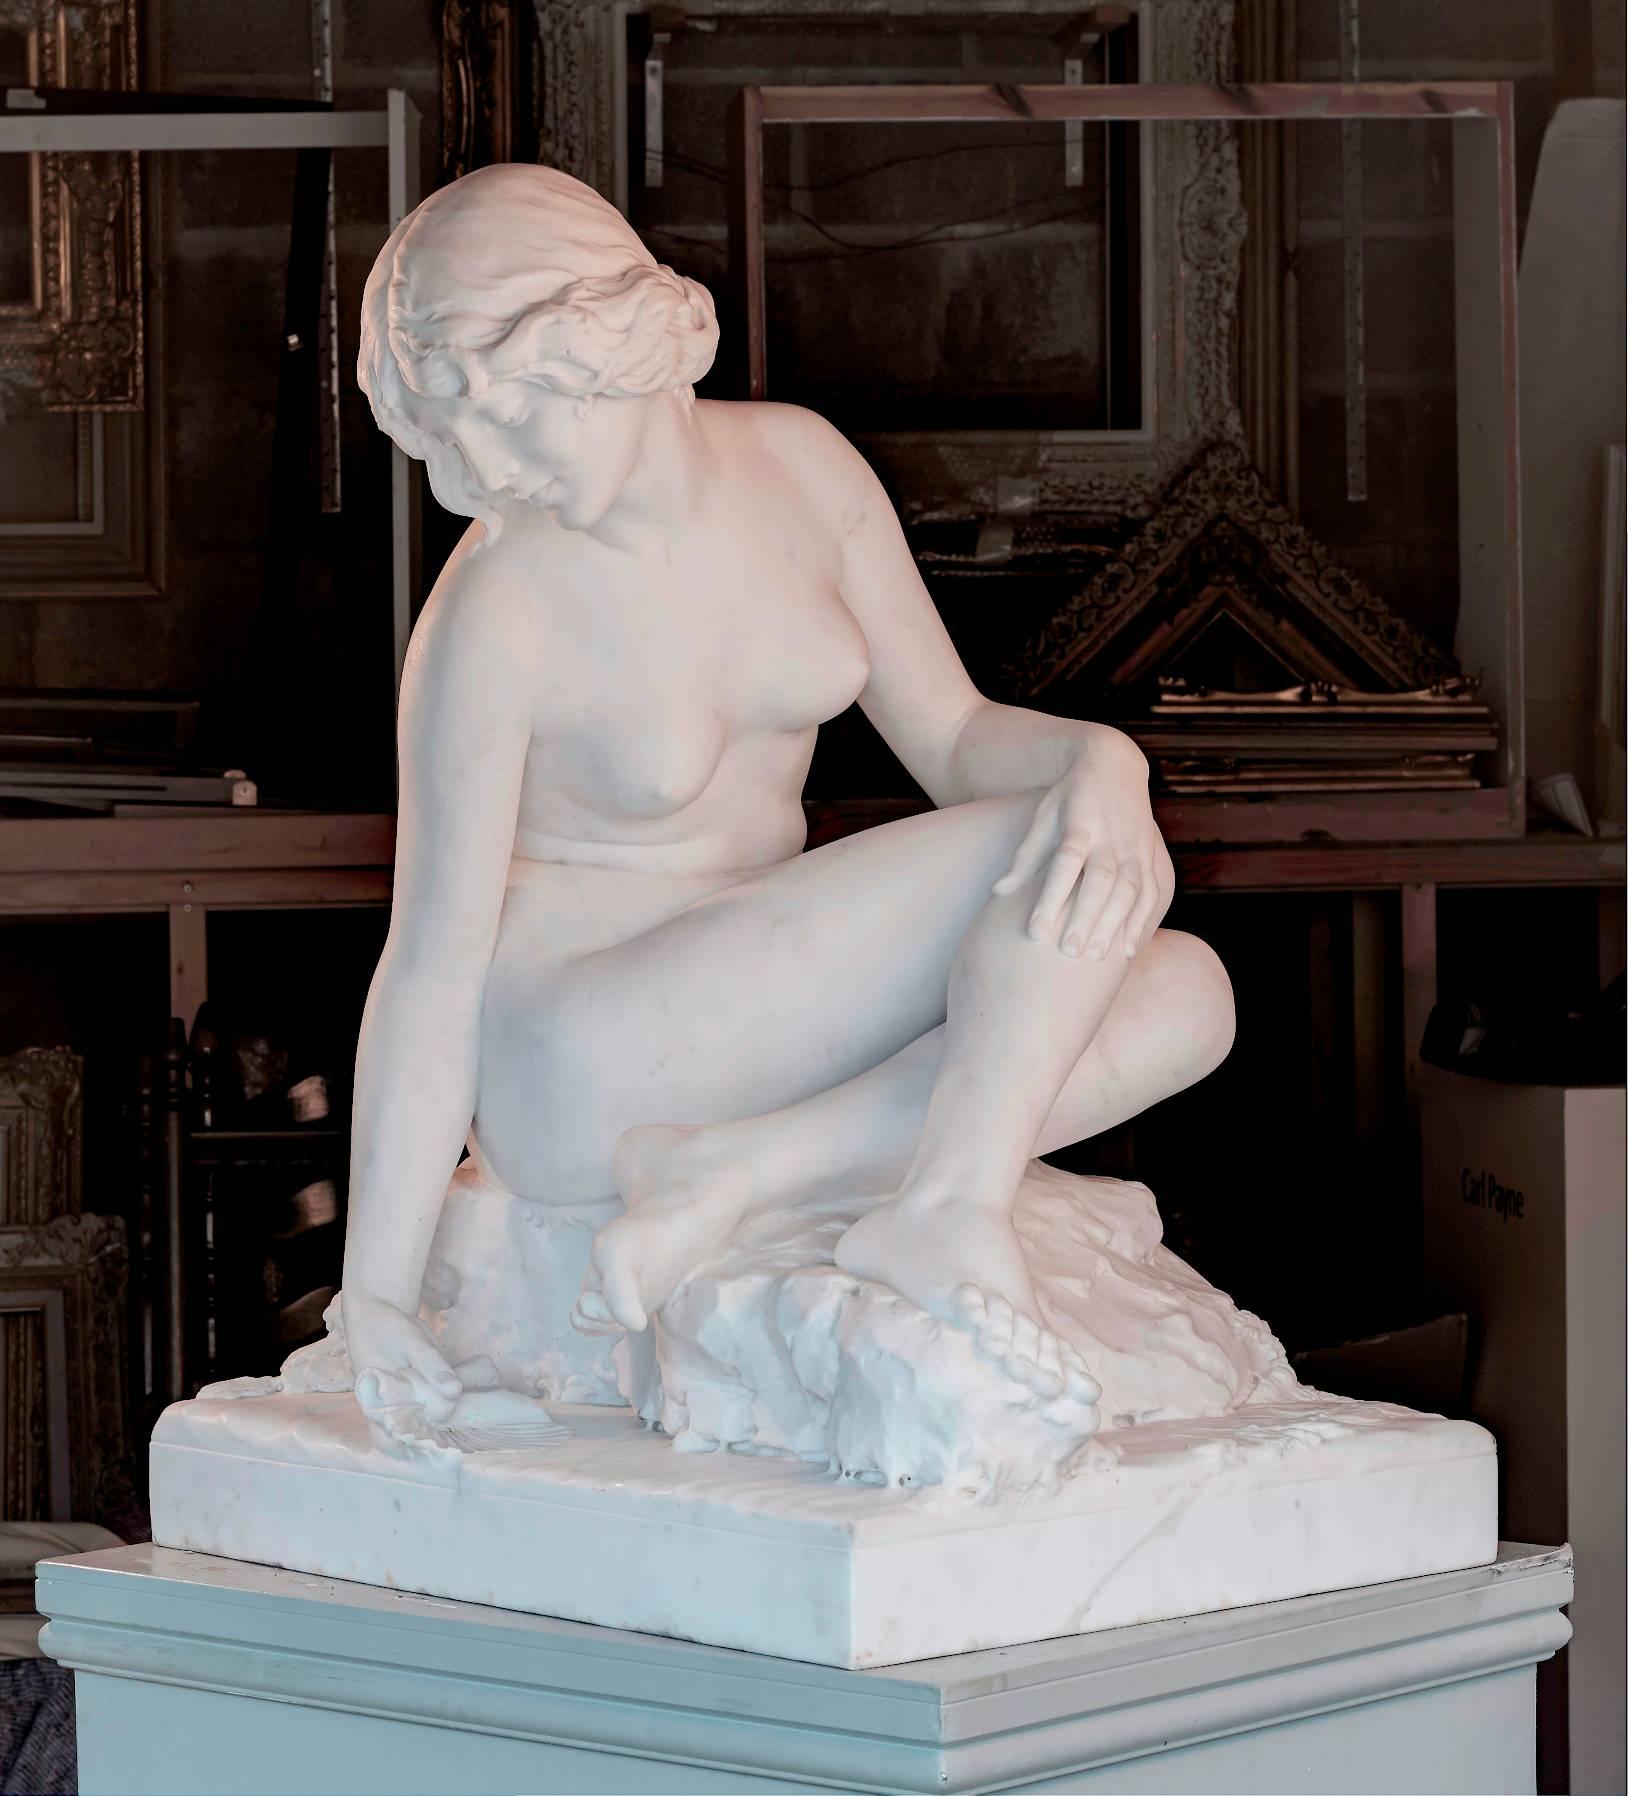 Carlo Pittaluga Nude Sculpture - White Marble Figurative Statue 'Nymph at a Well' by C. Pittulaga 